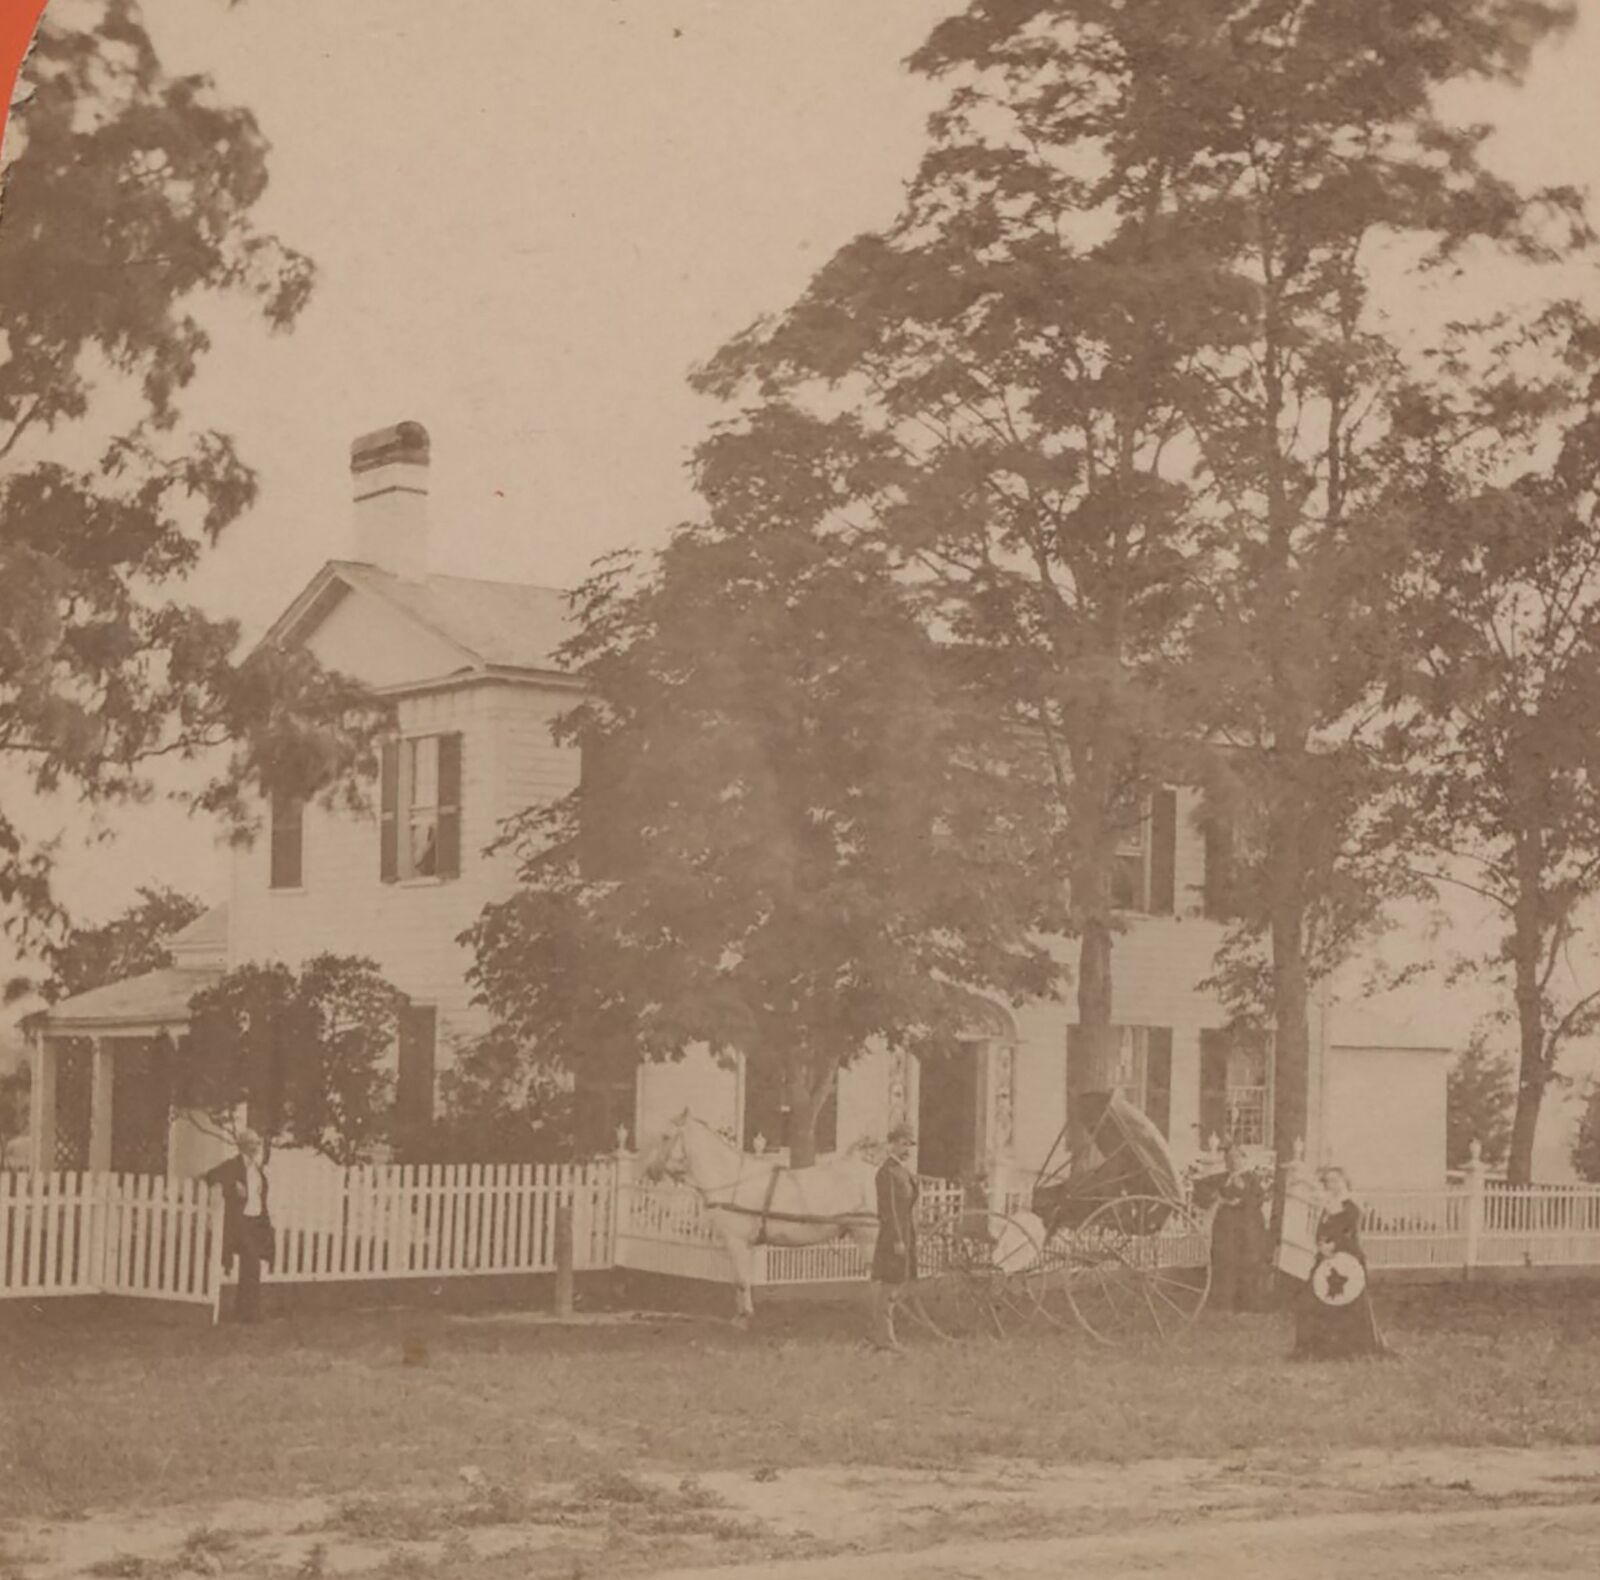 Birthplace of Genius Location Unknown Probably New England Stereoview c1870